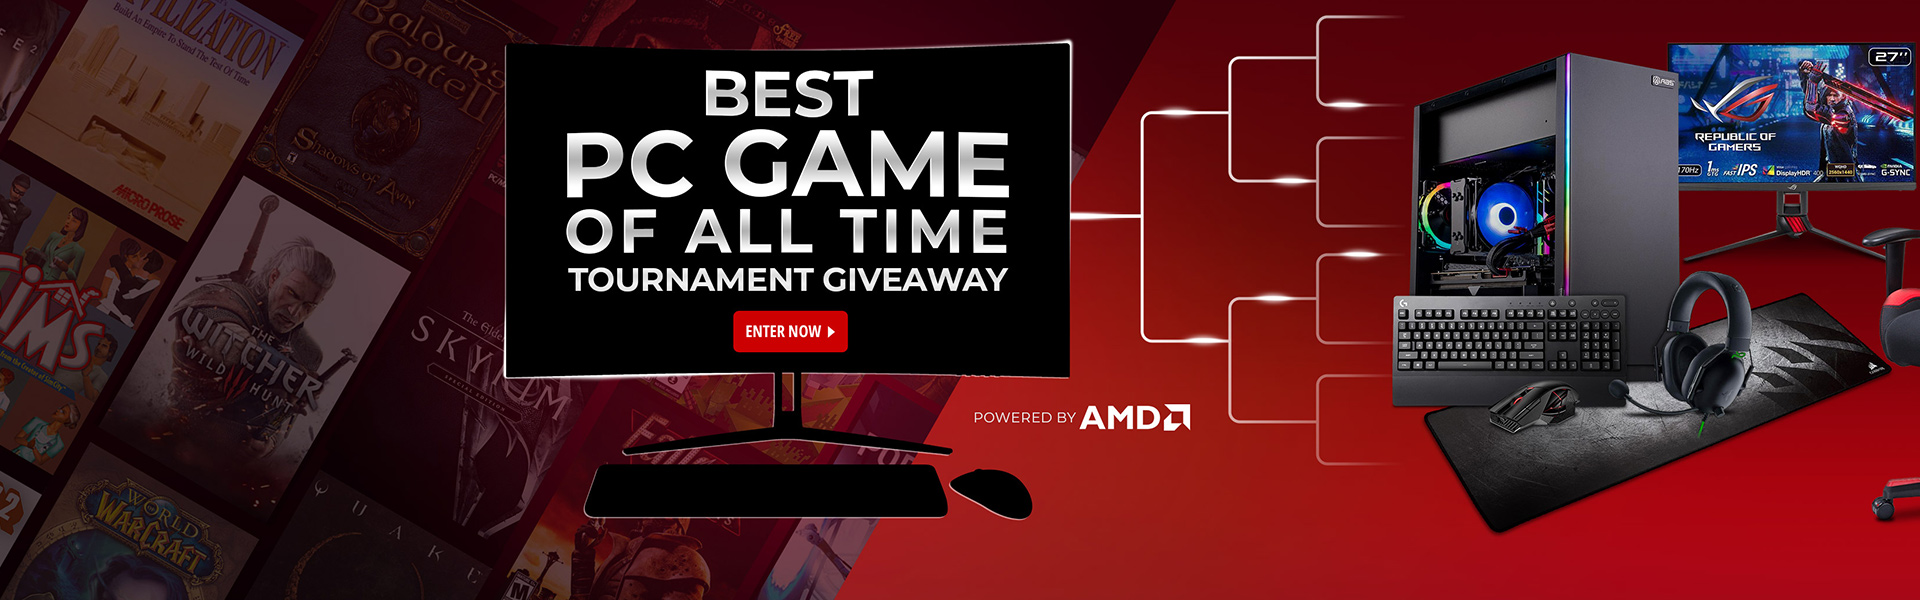 Newegg Launches Online Tournament to Crown the Best PC Game of All Time